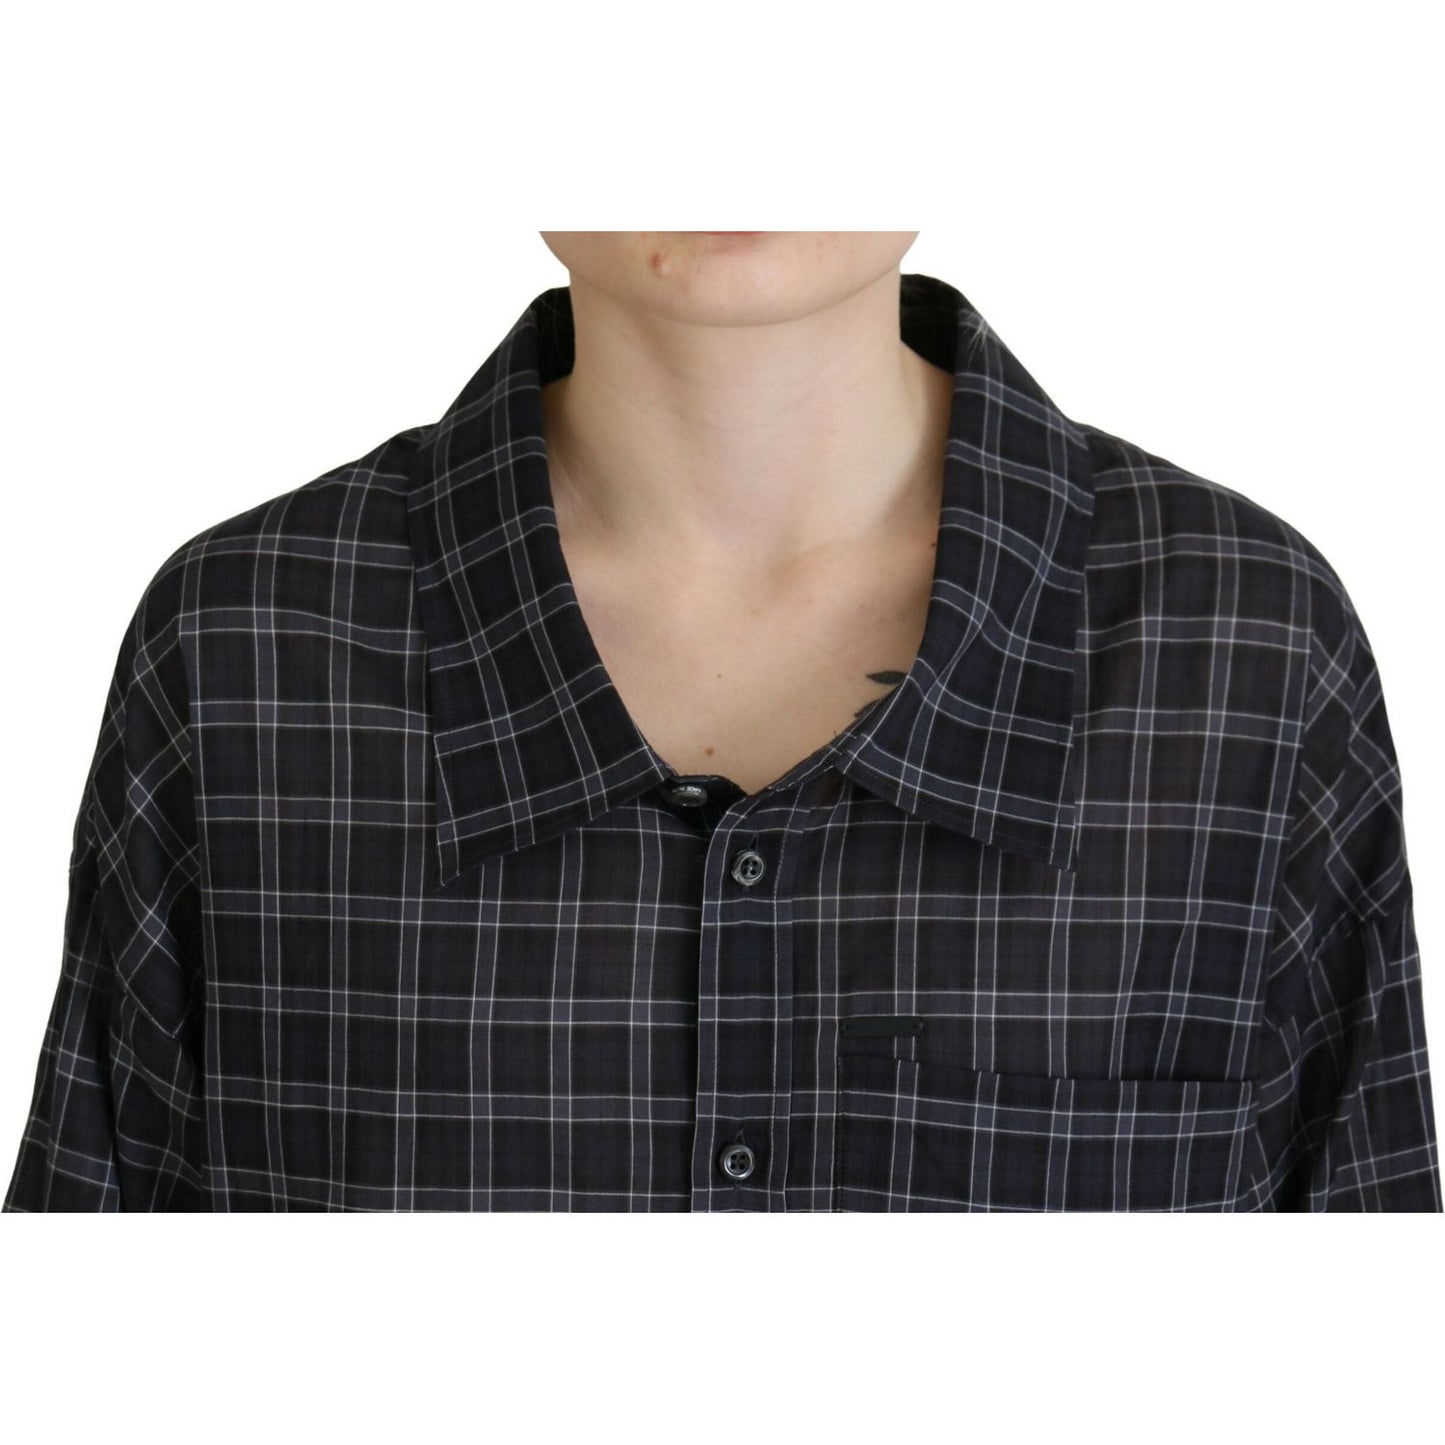 Dsquared² Black Checkered Collared Button Long Sleeves Shirt black-checkered-collared-button-long-sleeves-shirt